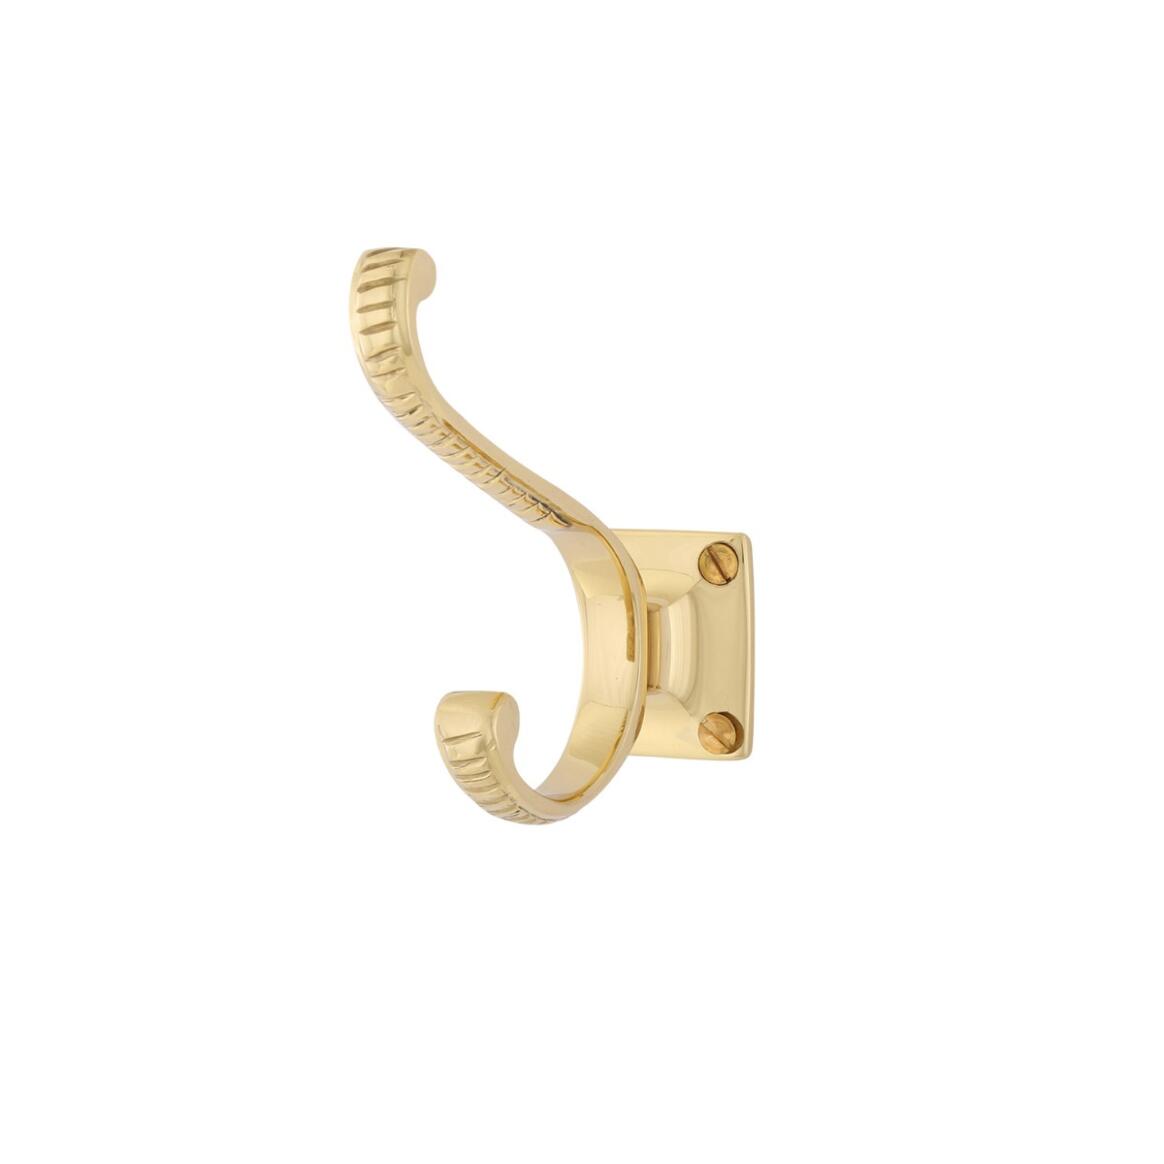 Bekan Brass Hat and Coat Hook 85x85mm main product image